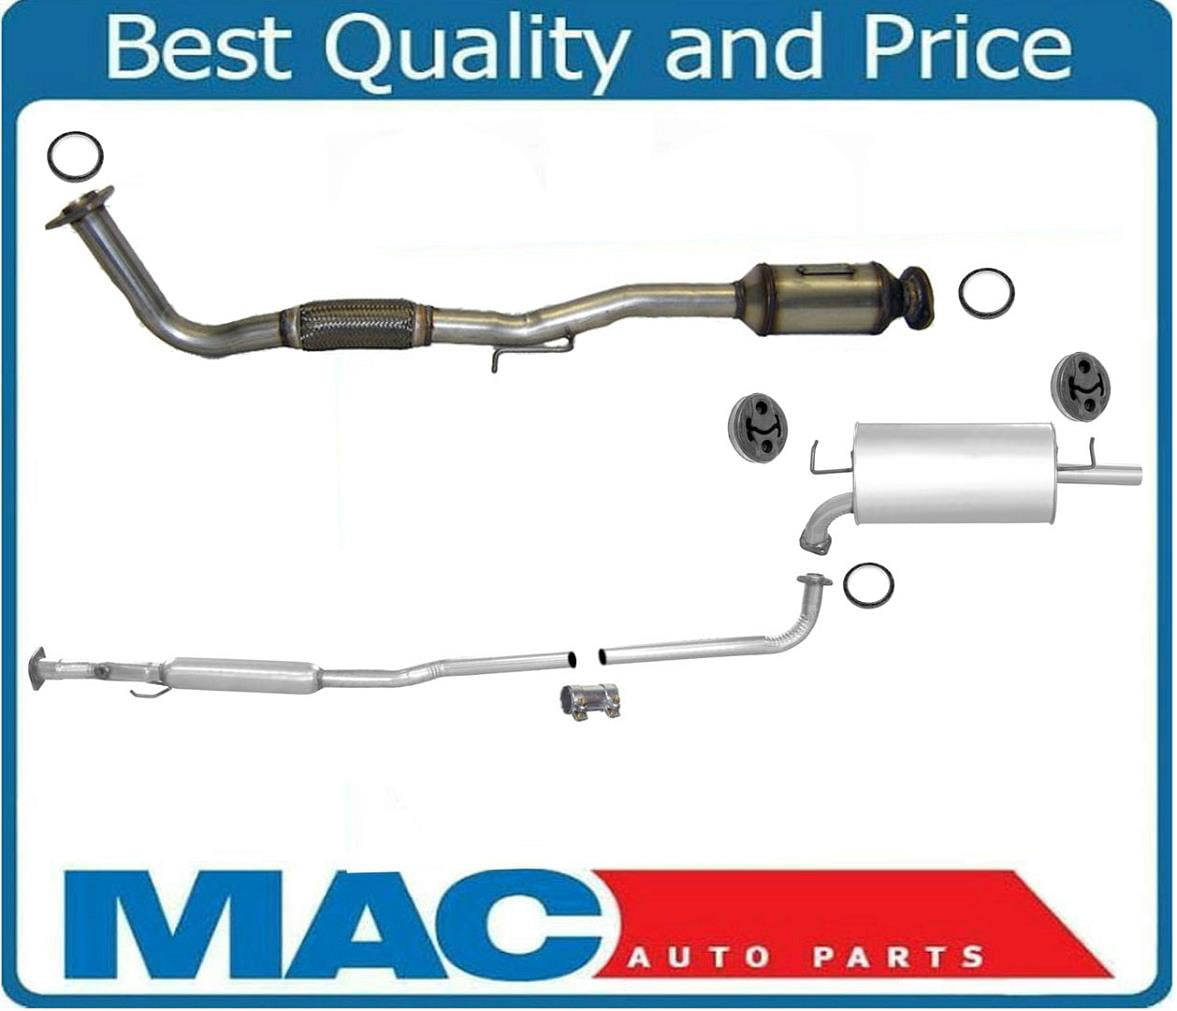 For 97-01 Camry/Solara 2.2L Direct Replace Catalytic Converter Exhaust Flex Pipe